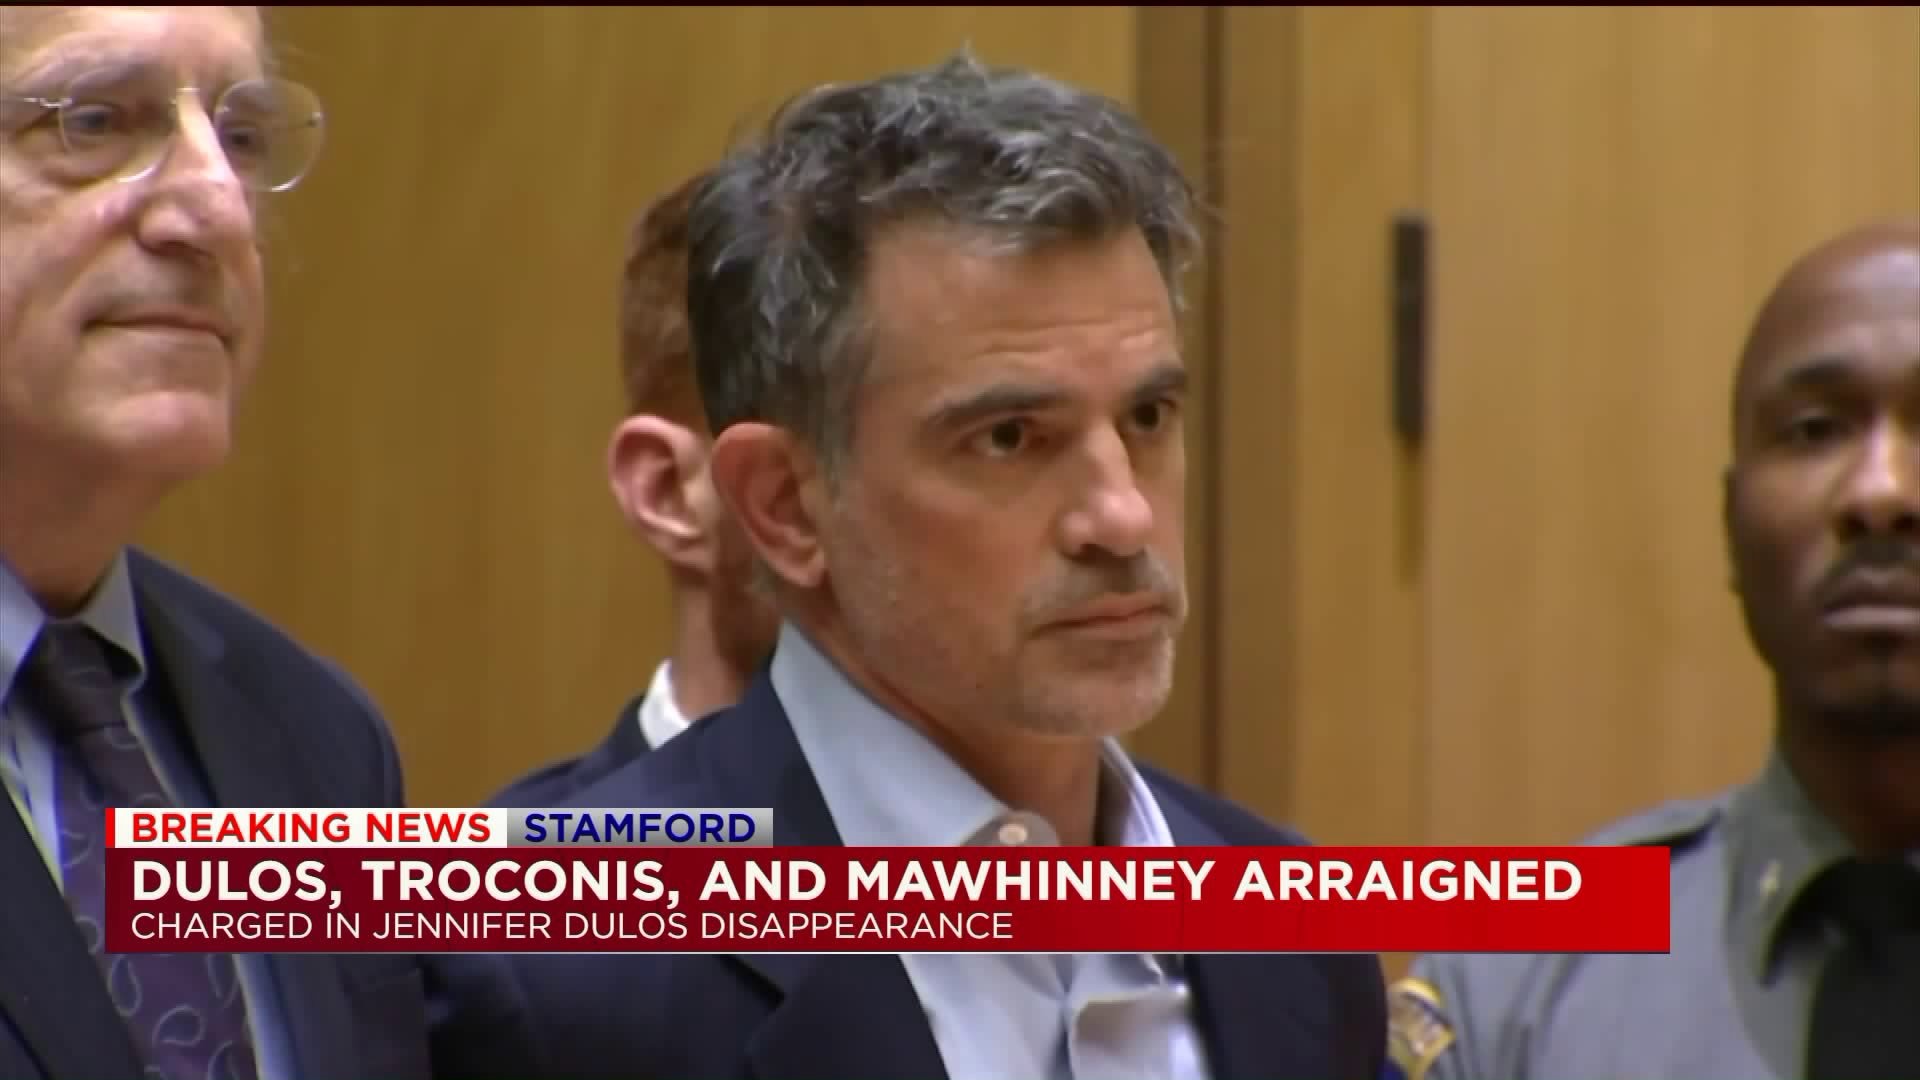 Dulos, Troconis, Mawhinney to remain in custody at least overnight